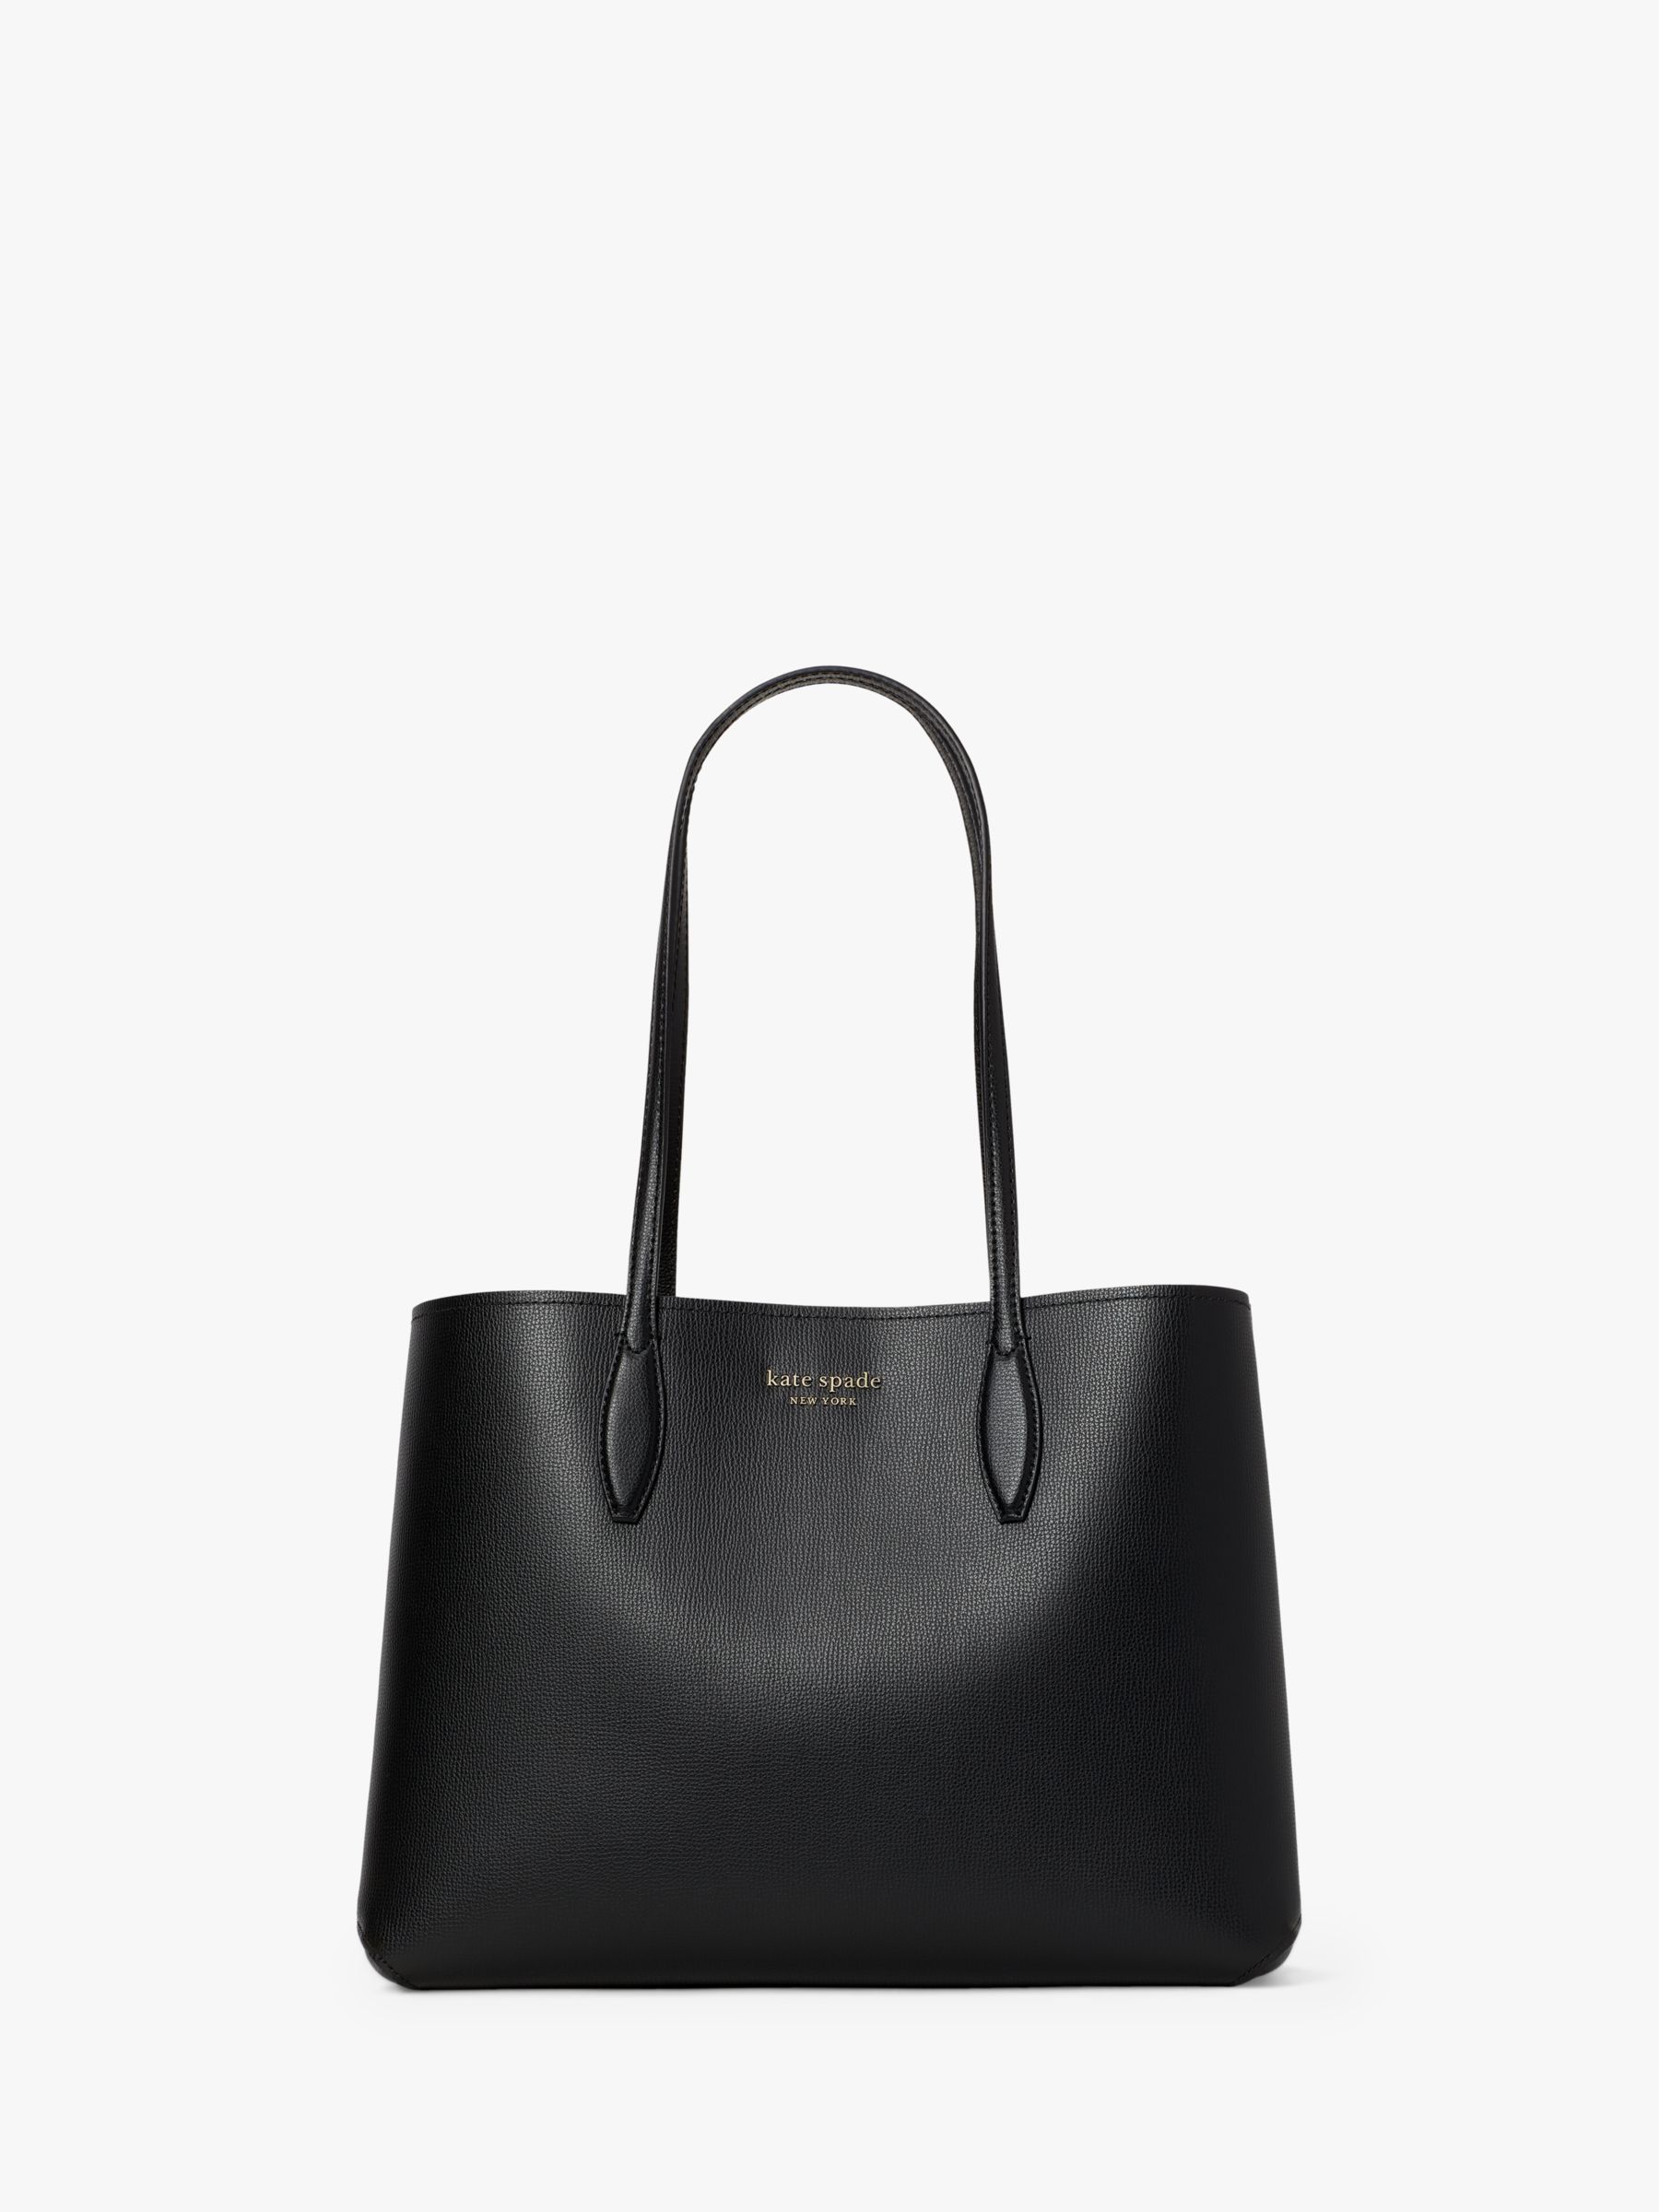 Kate Spade Satchel bags and purses for Women